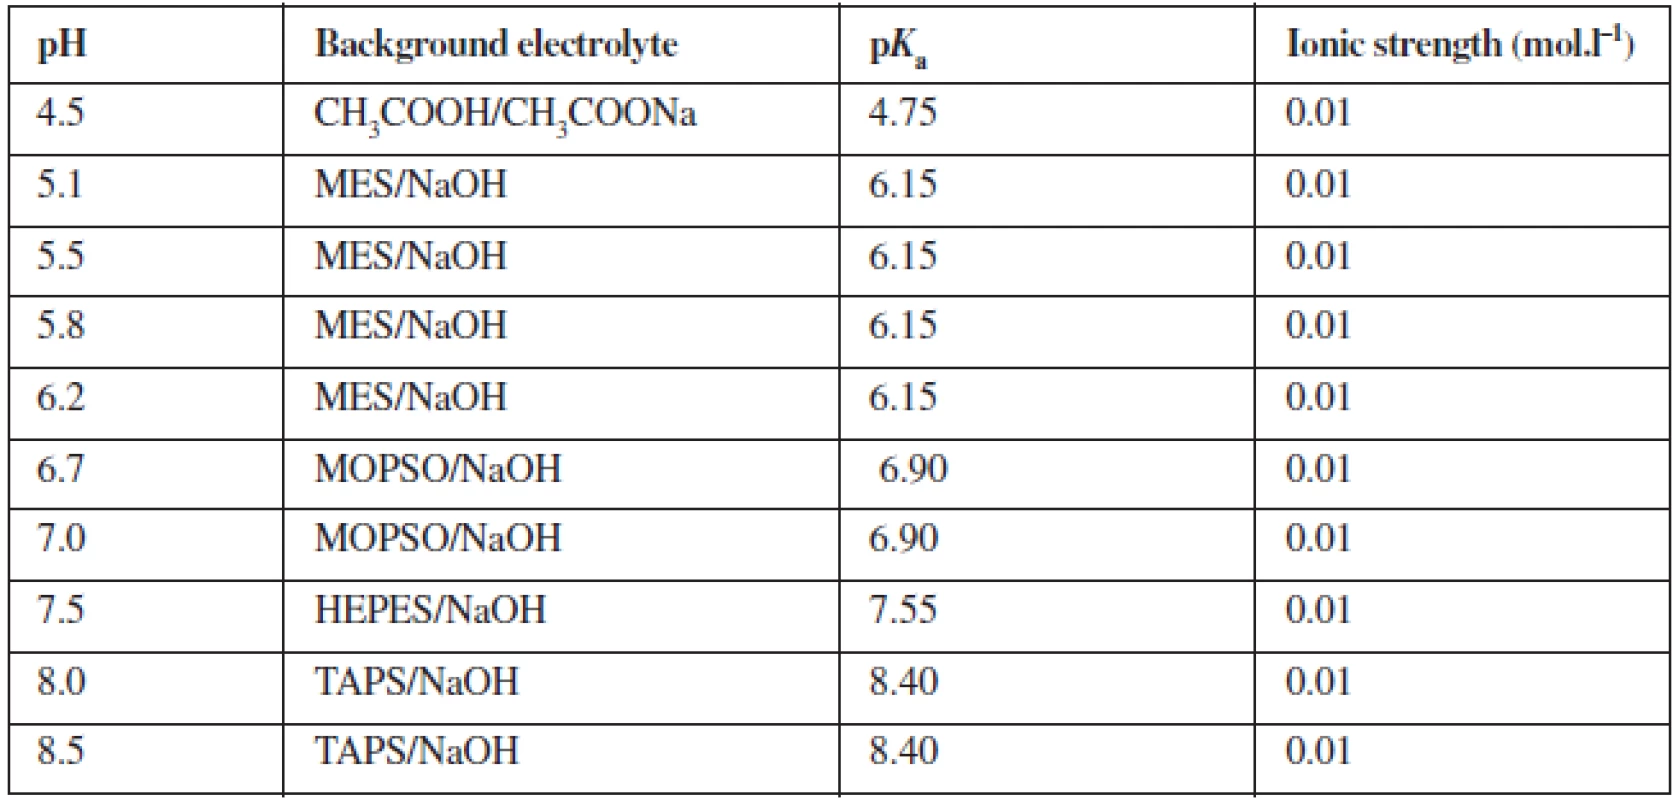 Composition of background electrolyte system